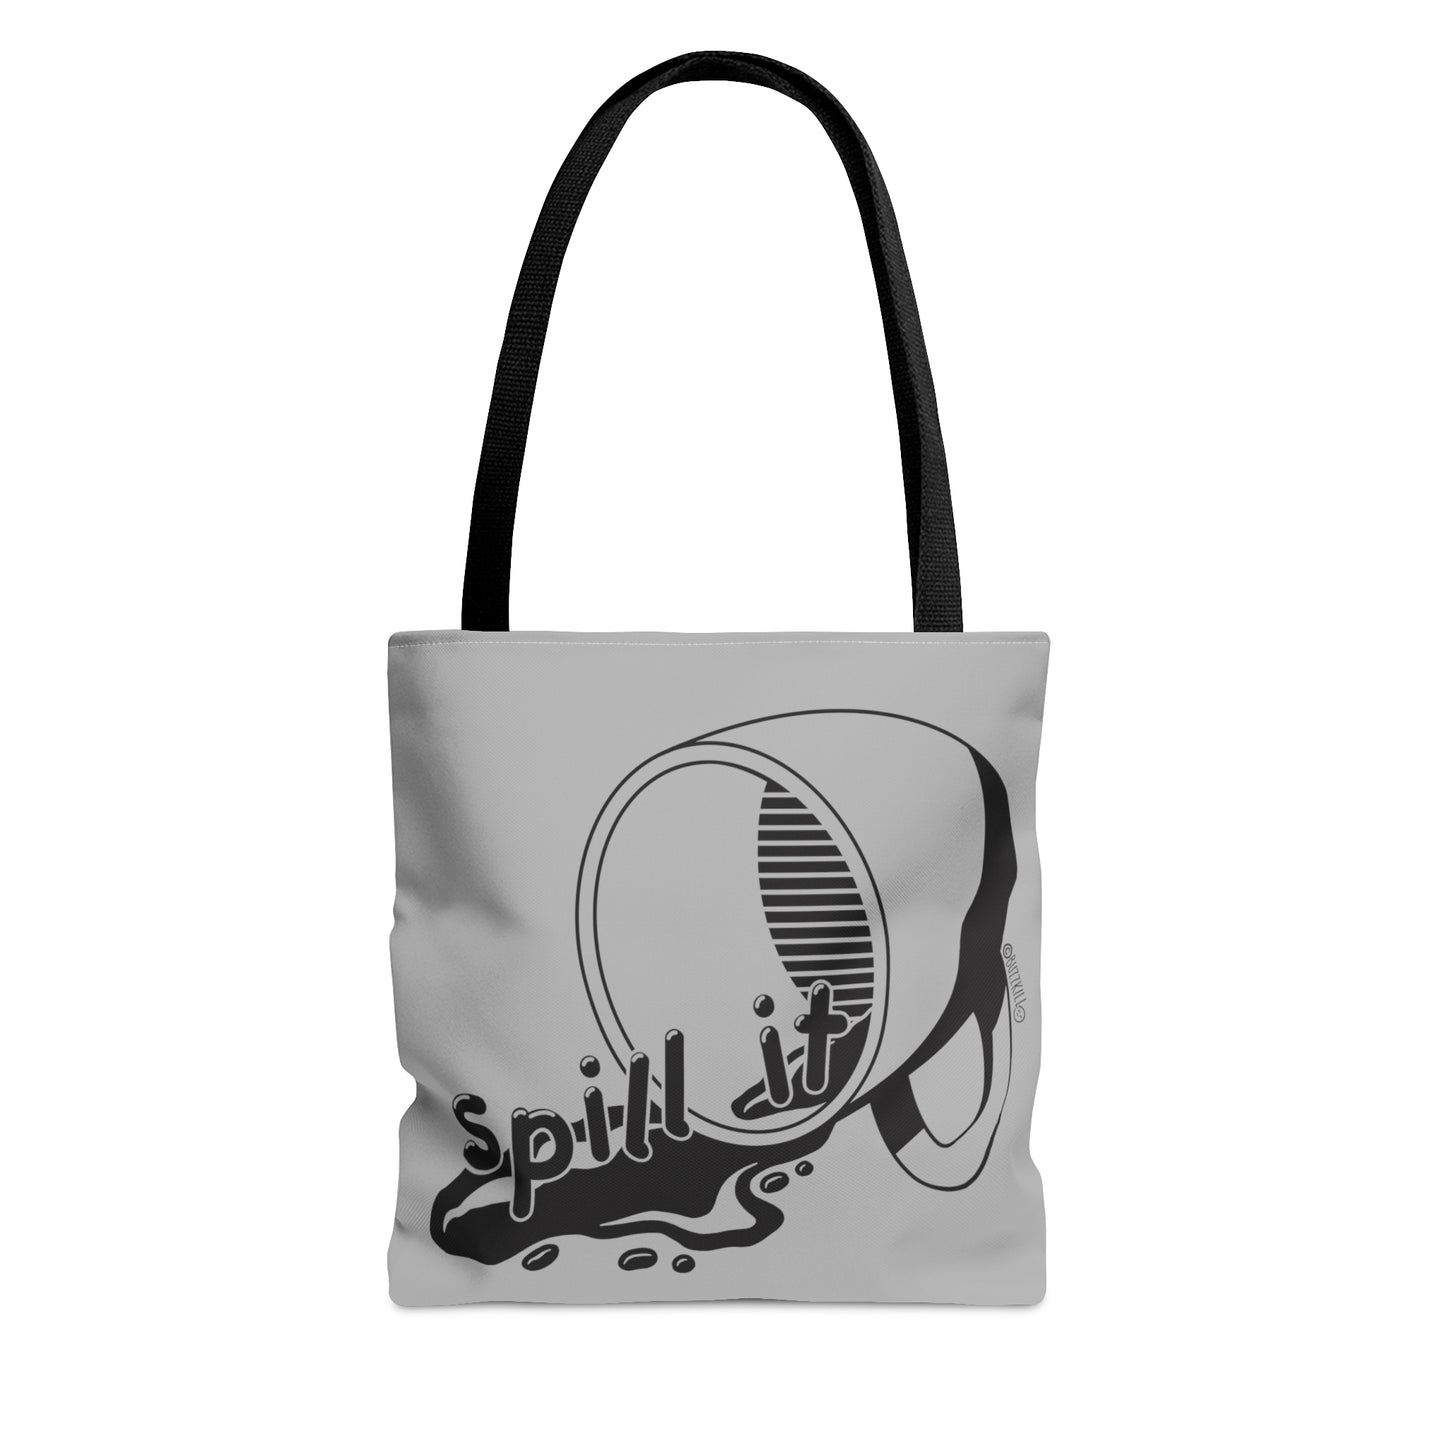 Spill It - Tote Bag